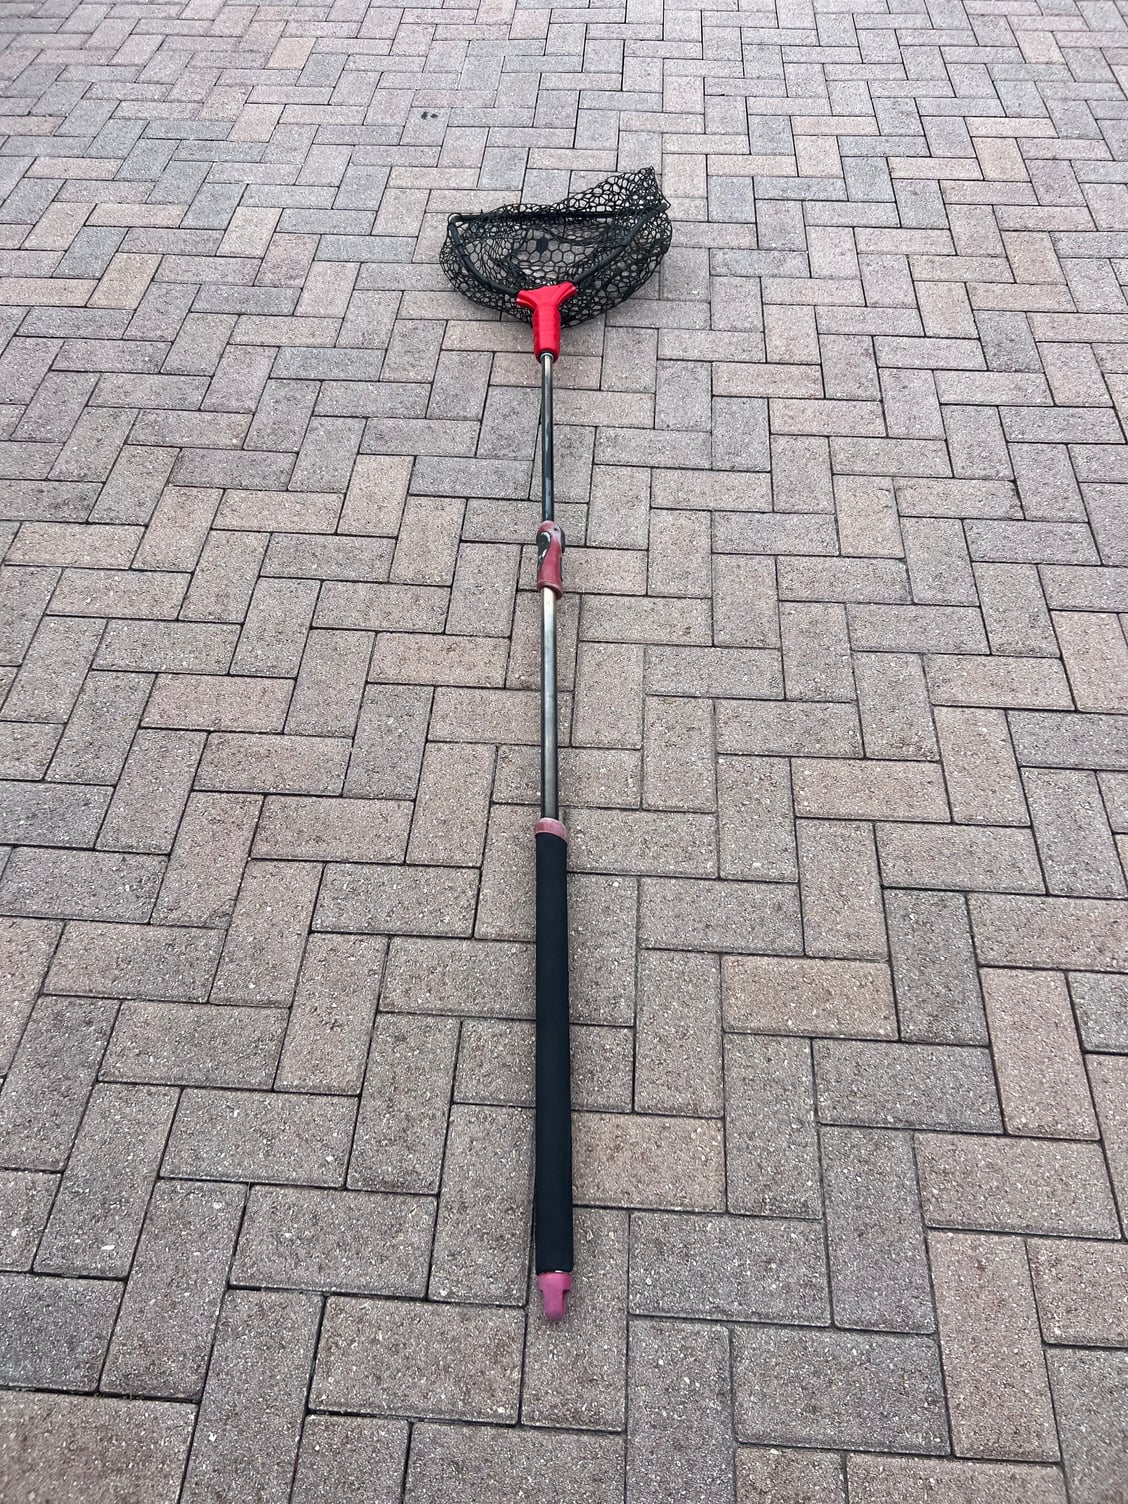 EGO S2 Slider Net w/Rubber netting. Extends to 60” good condition. Stuart,  Florida - The Hull Truth - Boating and Fishing Forum